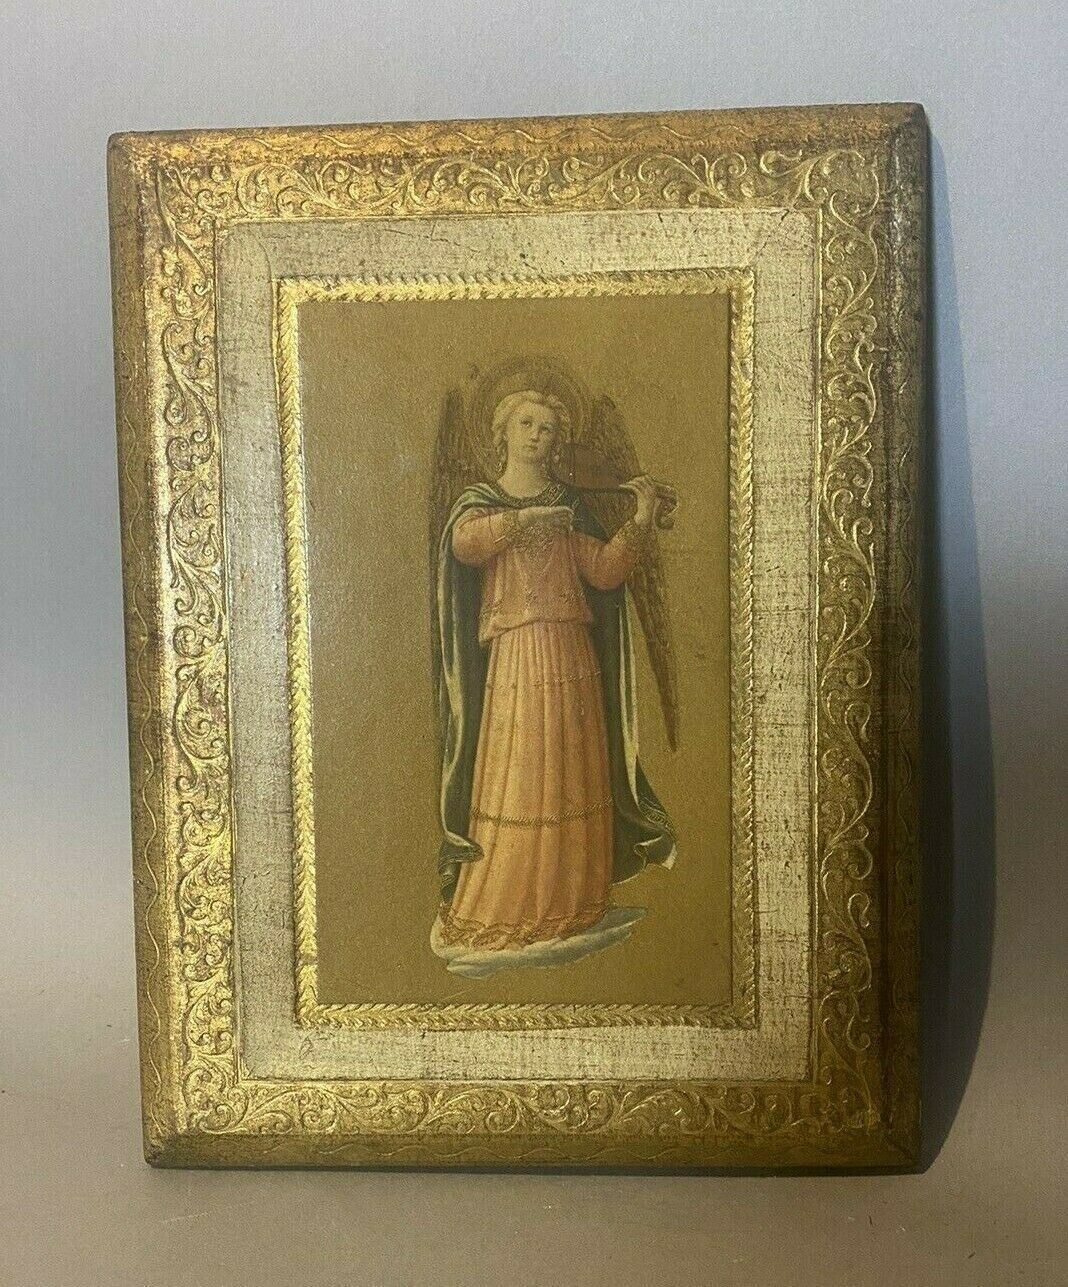 VINTAGE ITALIAN GILT DECORATED PANEL WITH A HARP PLAYING ANGEL